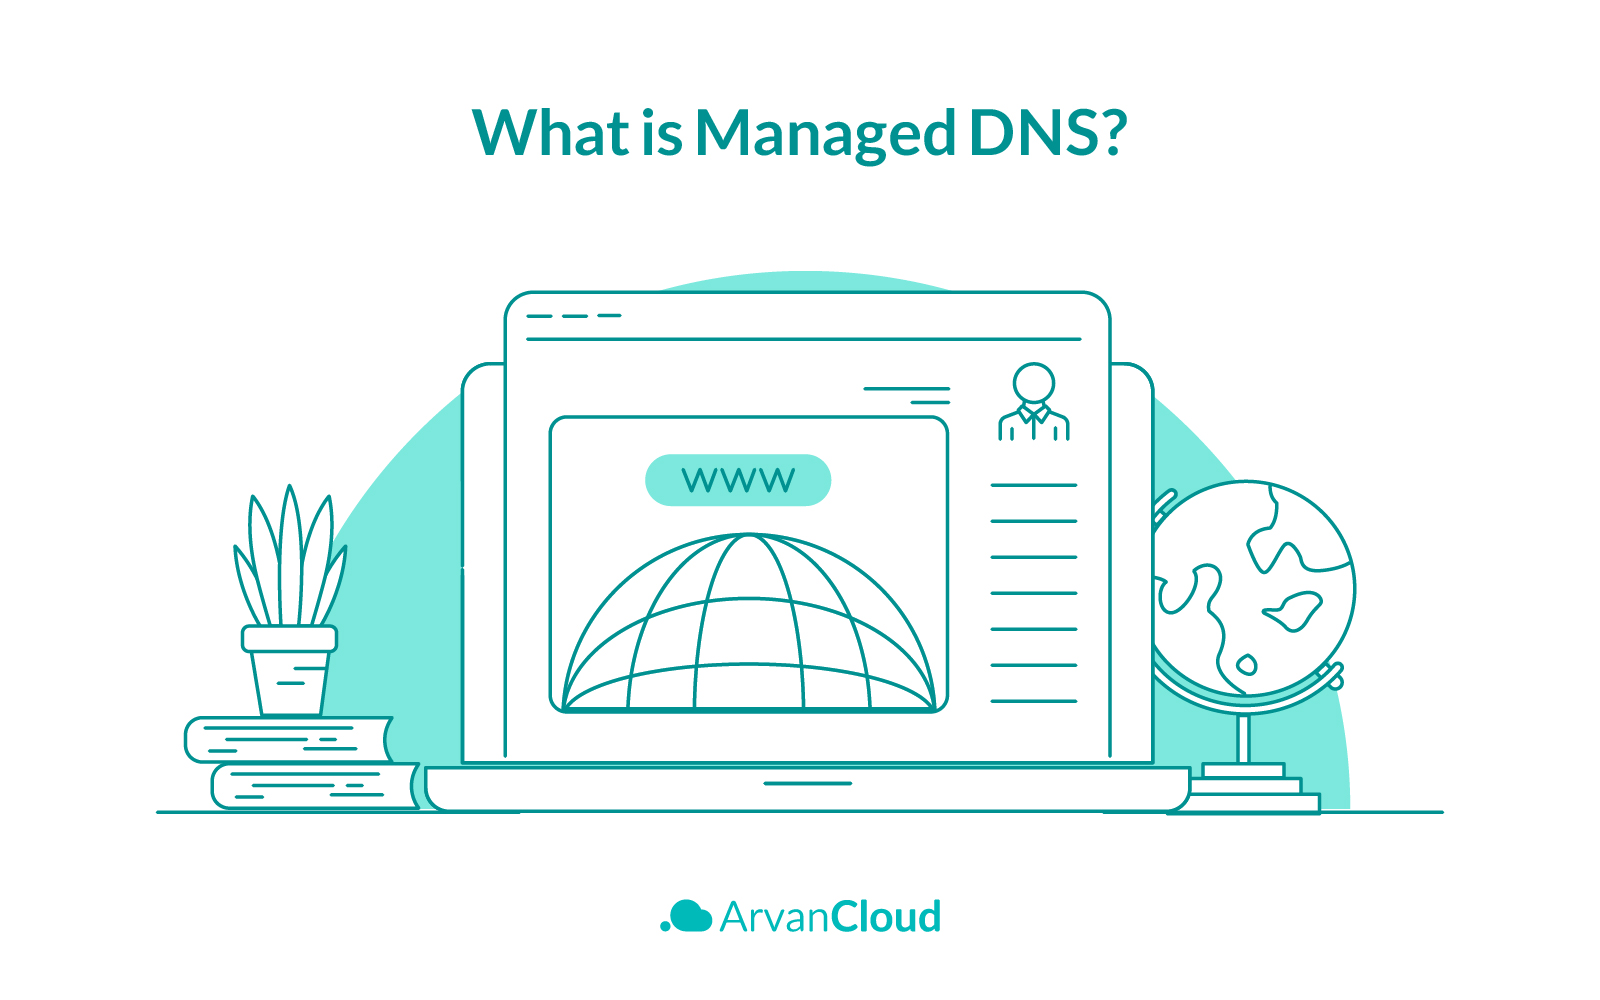 What is Managed DNS?